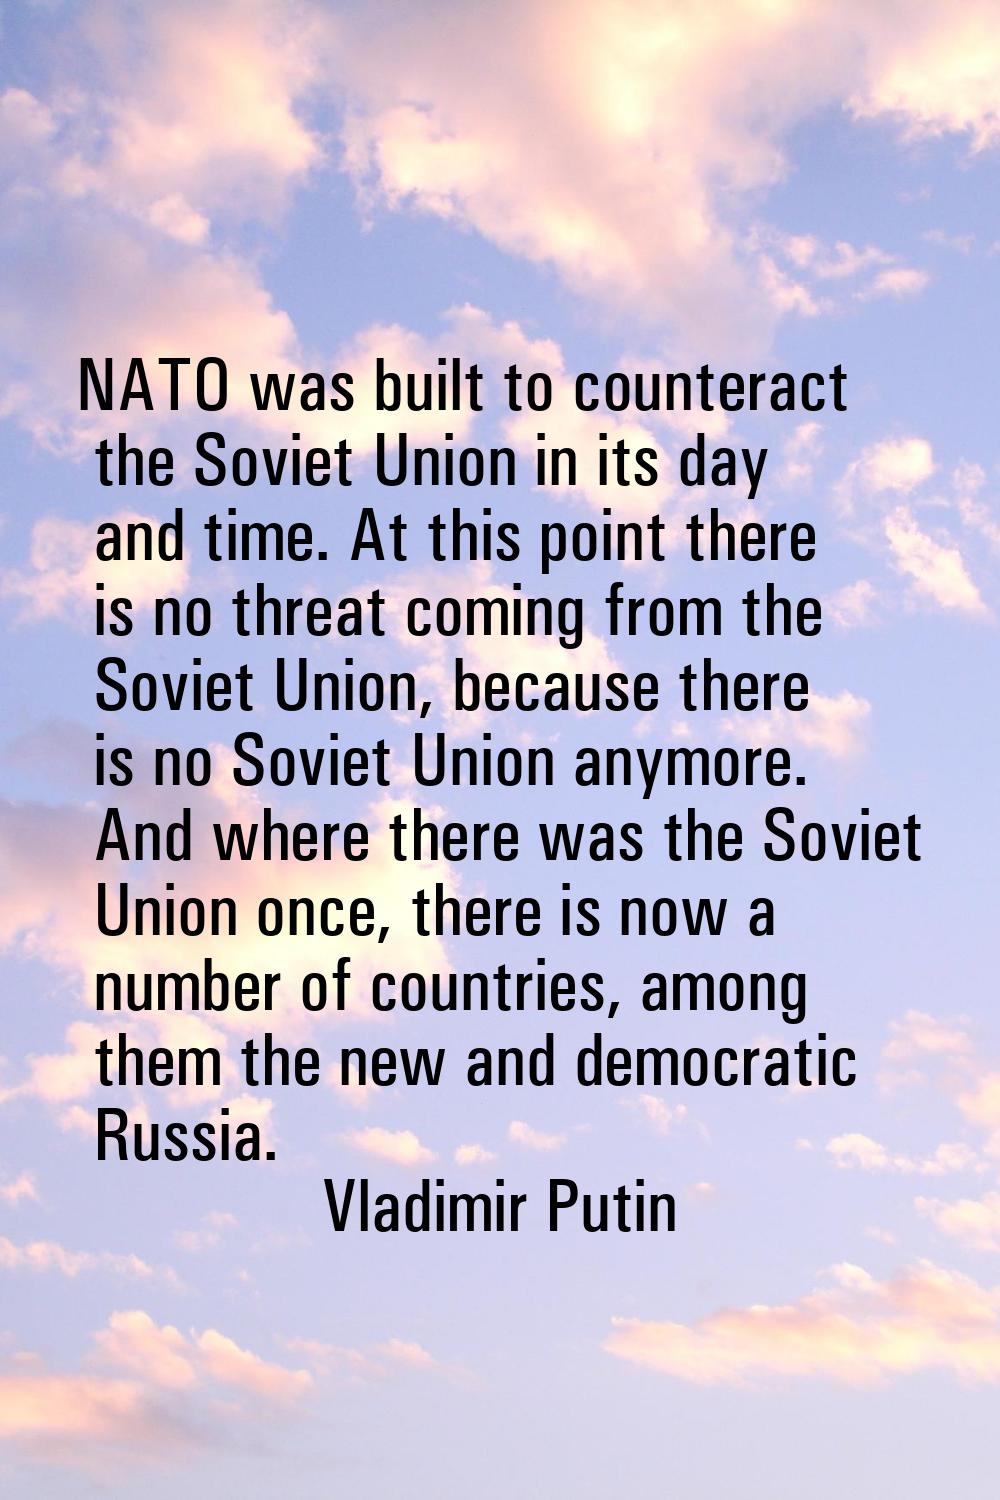 NATO was built to counteract the Soviet Union in its day and time. At this point there is no threat